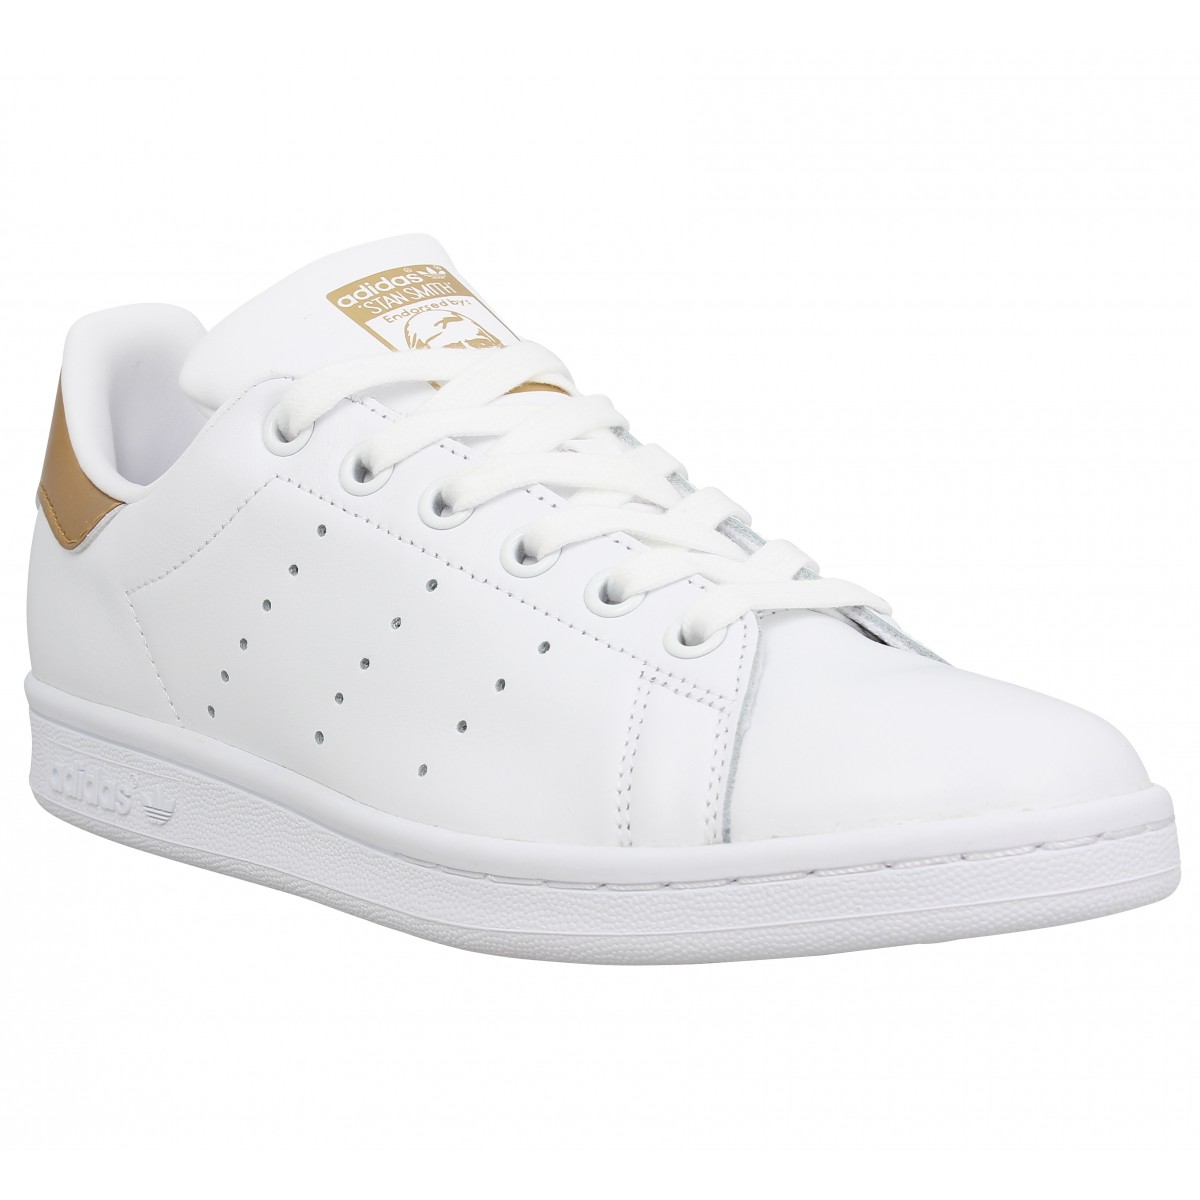 stan smith ecaille femme or